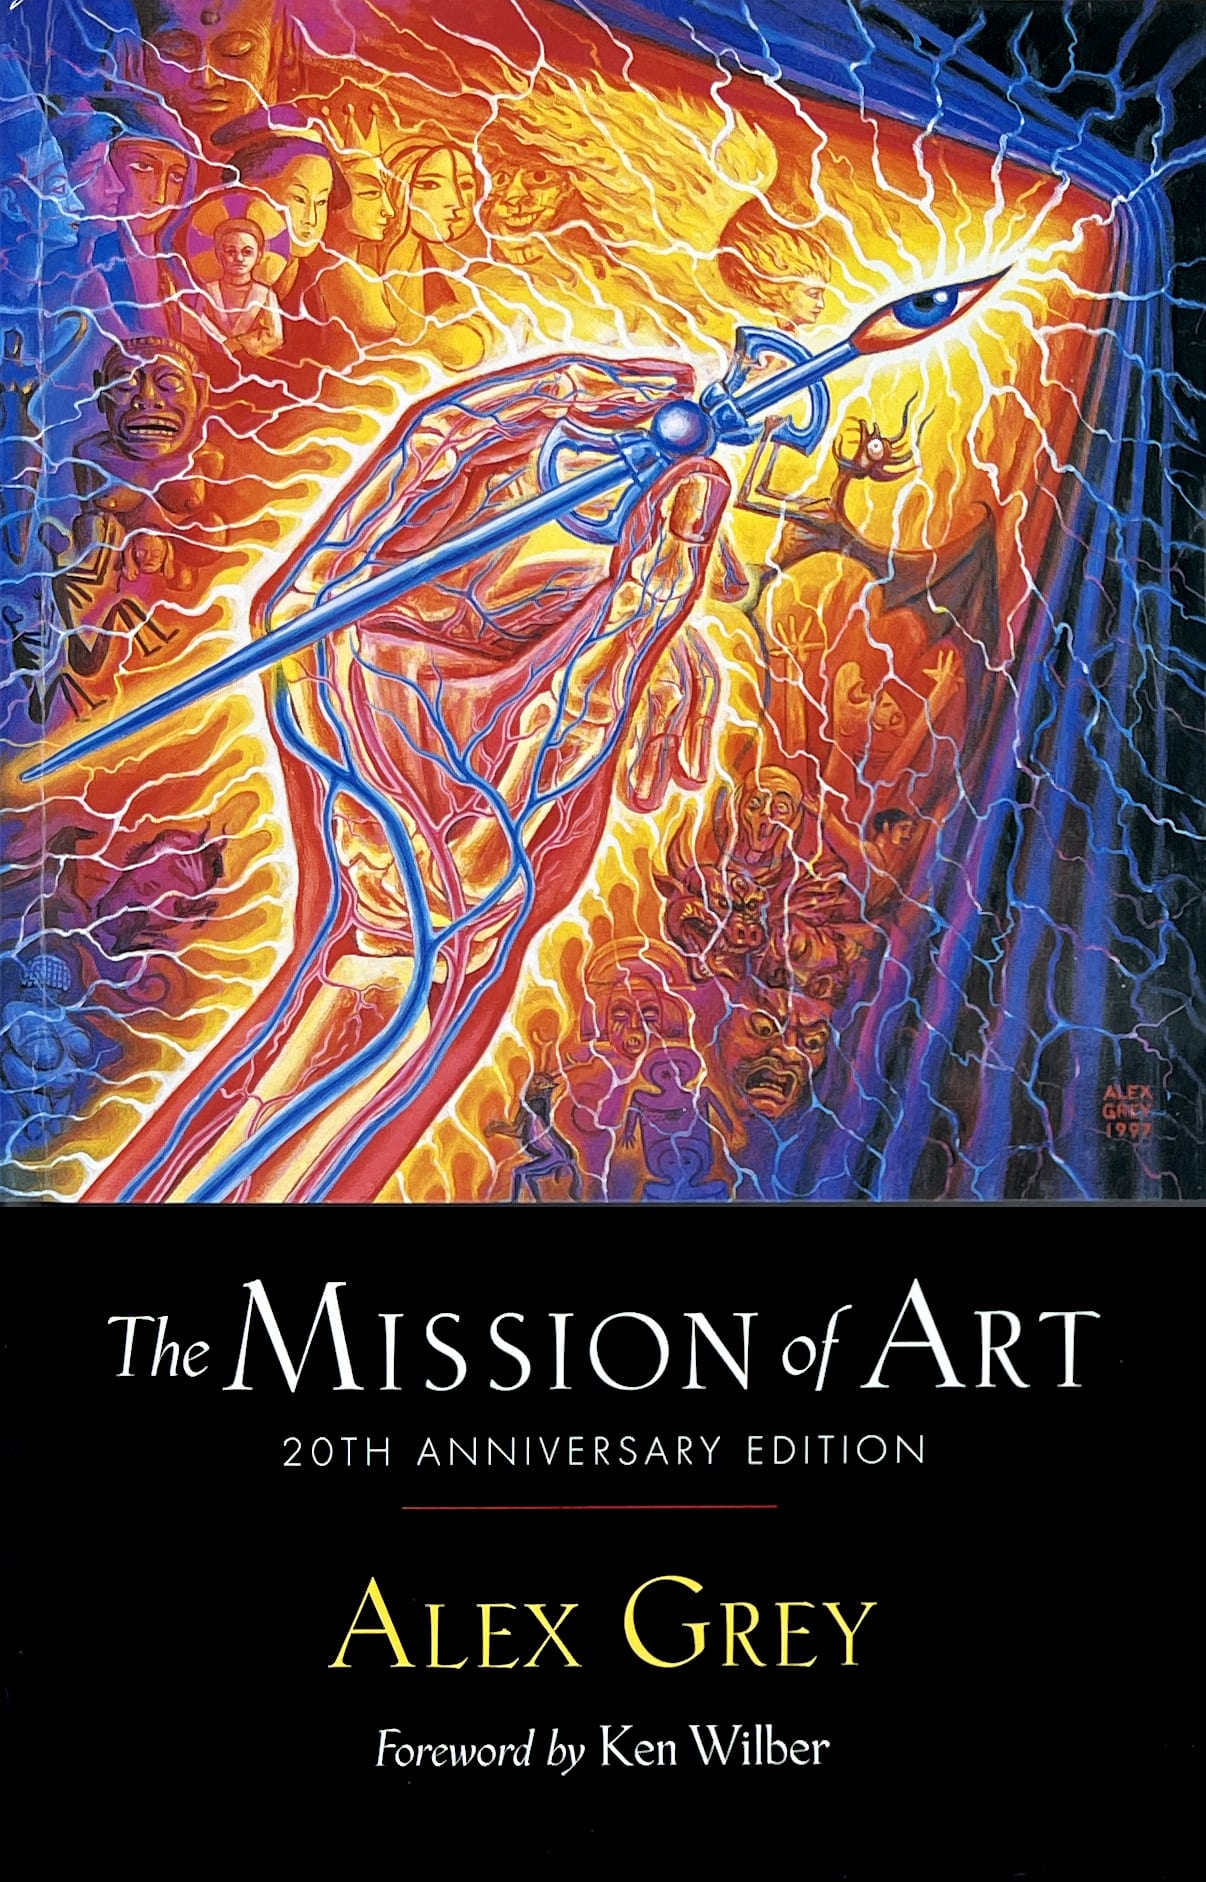 The Mission of Art, 1998